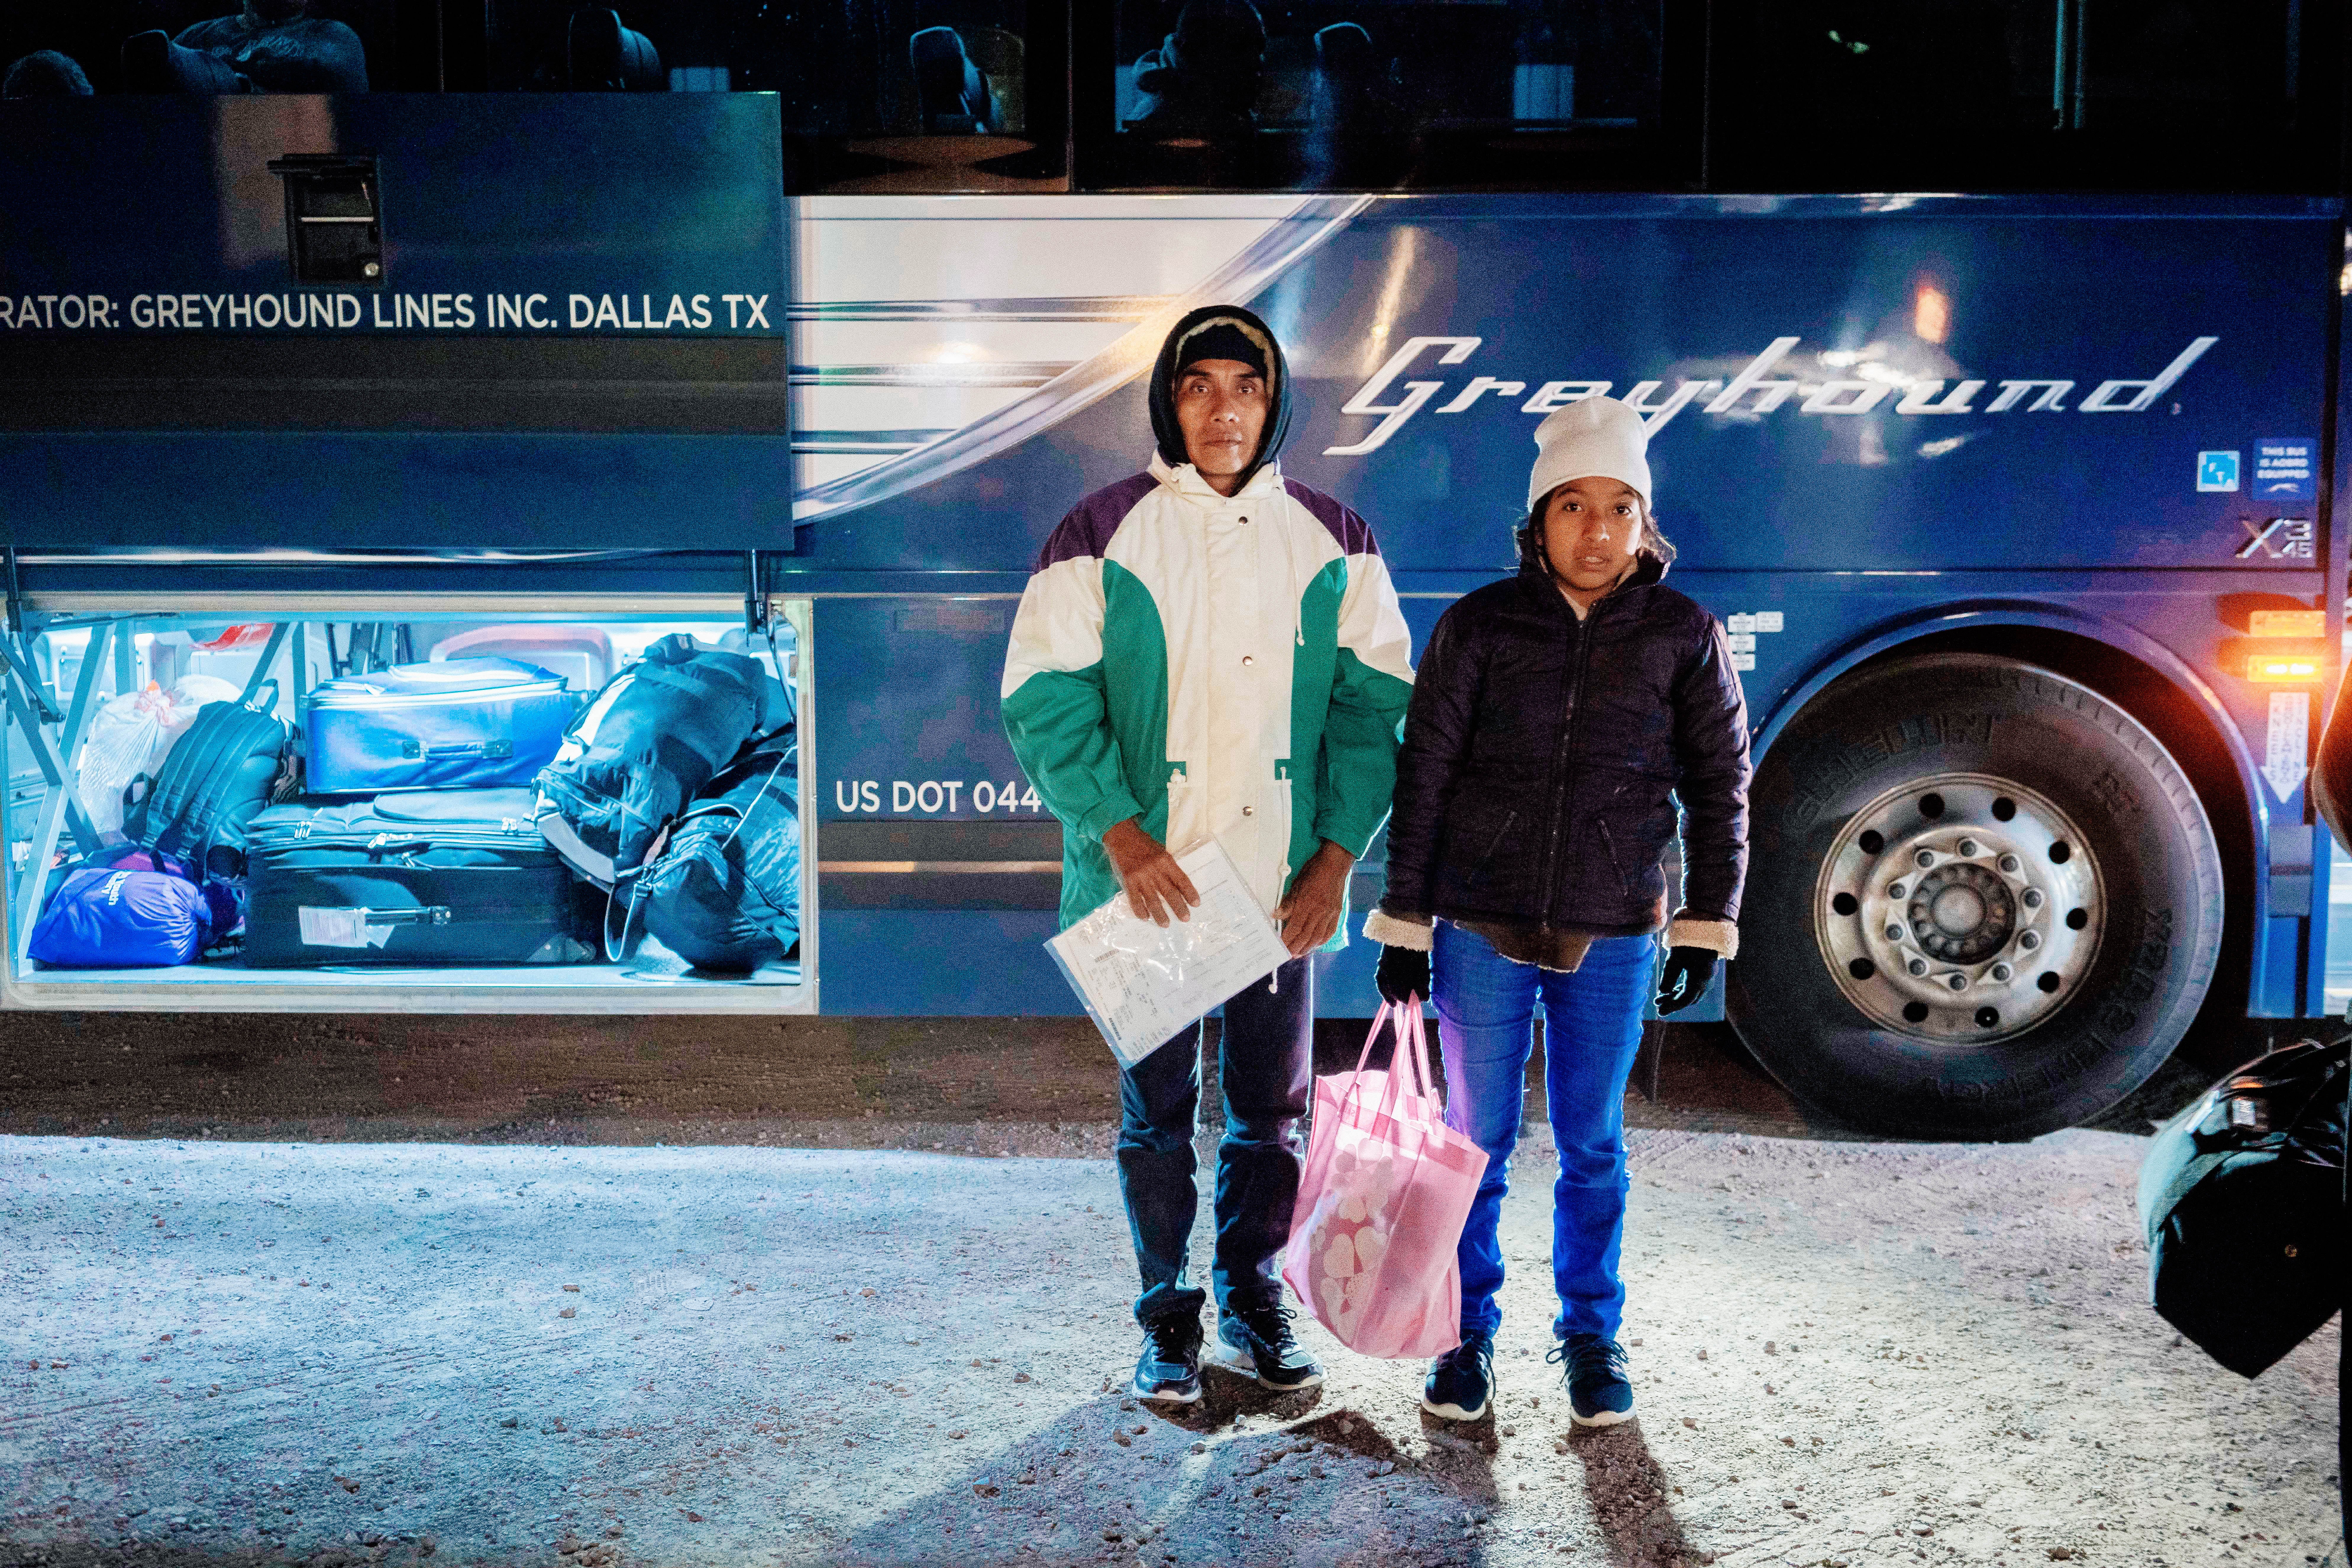 A man and his daughter stand in front of a Greyhound bus.